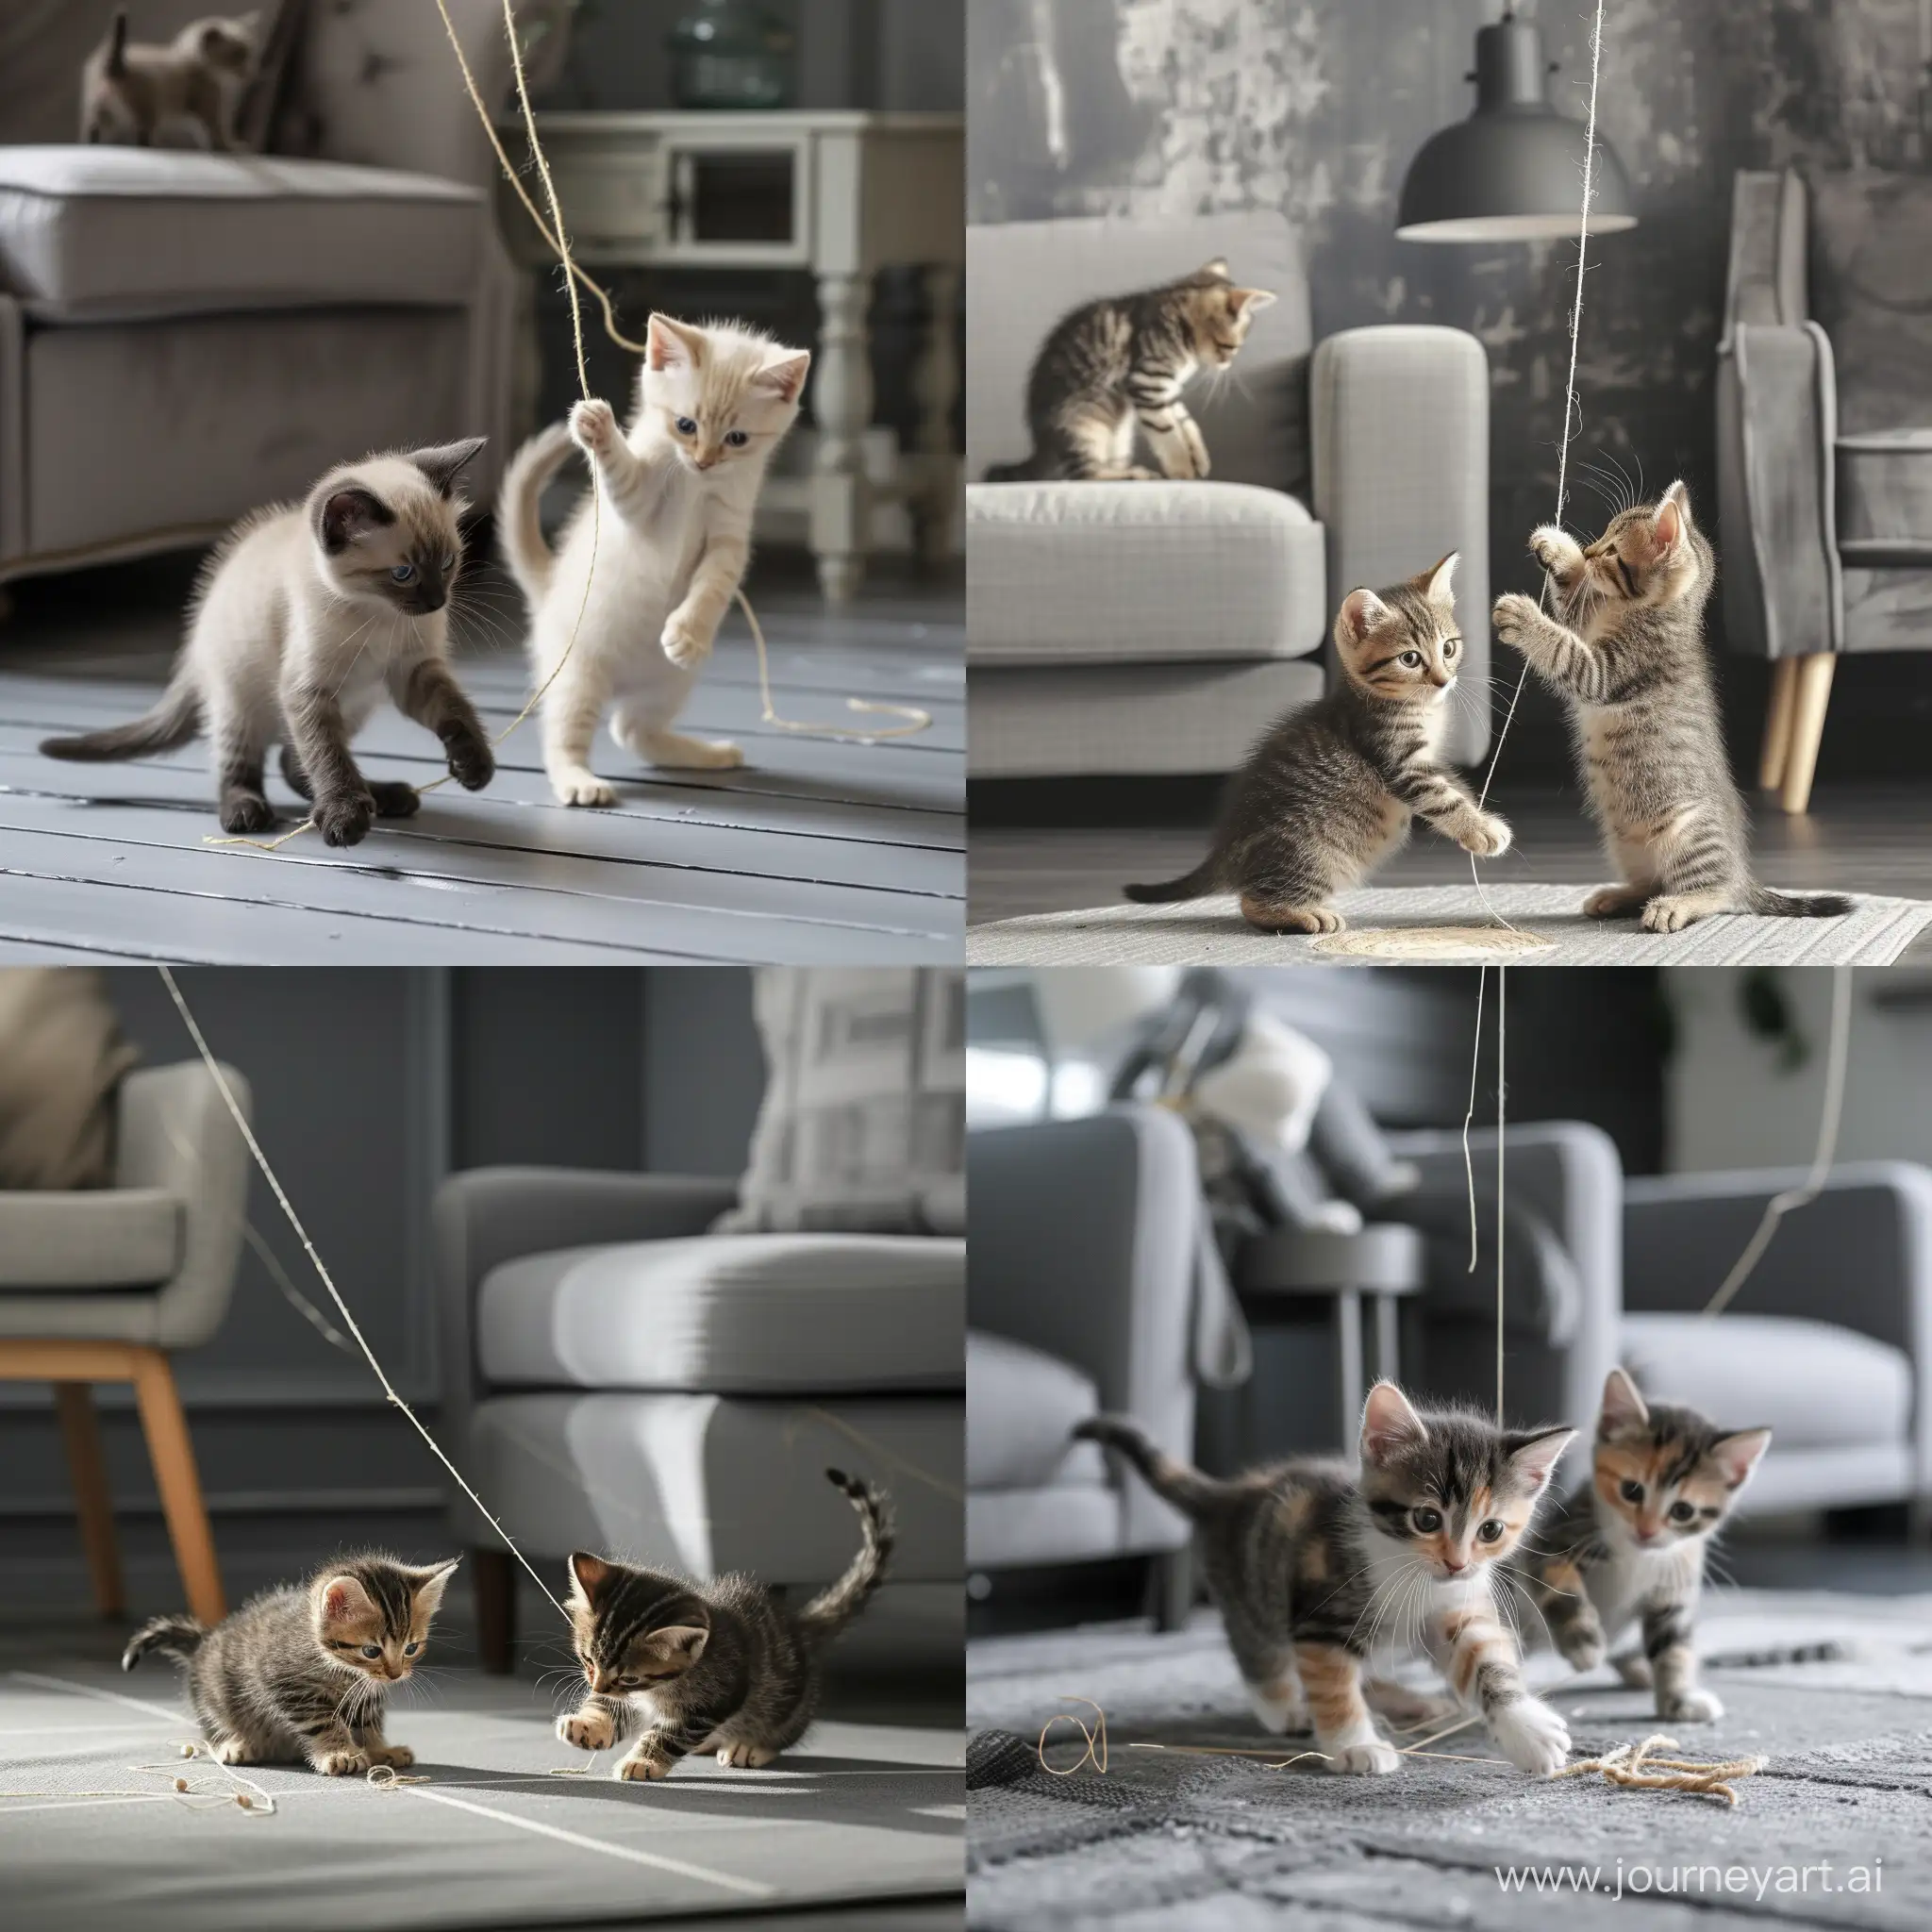 Adorable-Kittens-Engaging-in-Playful-Activities-with-String-in-a-Stylish-Greythemed-Interior